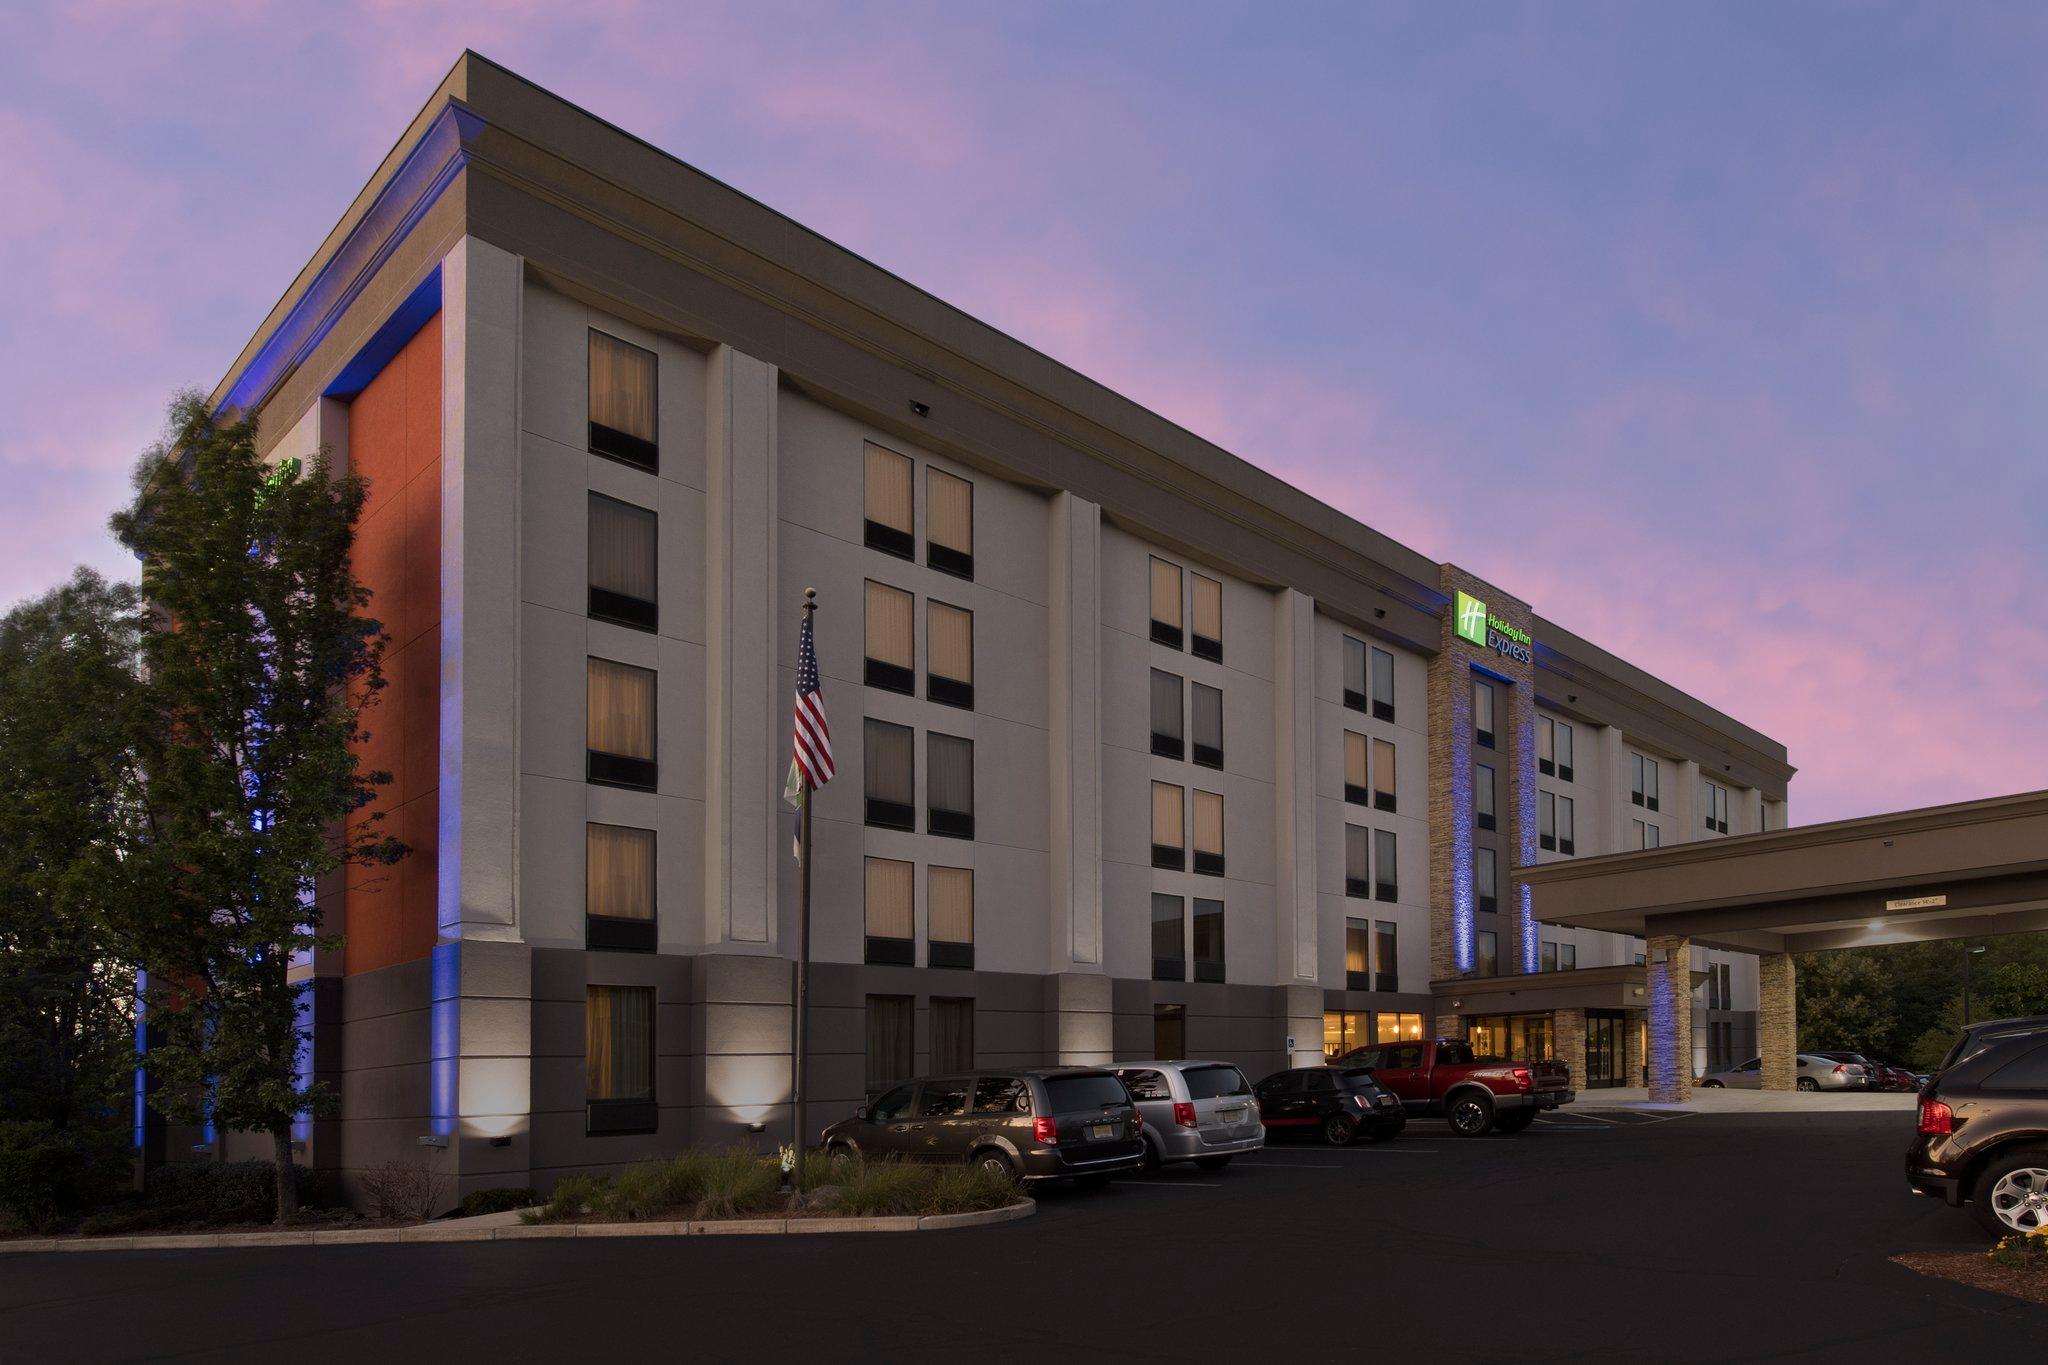 Holiday Inn Express Lawrence-Andover in Lawrence, MA